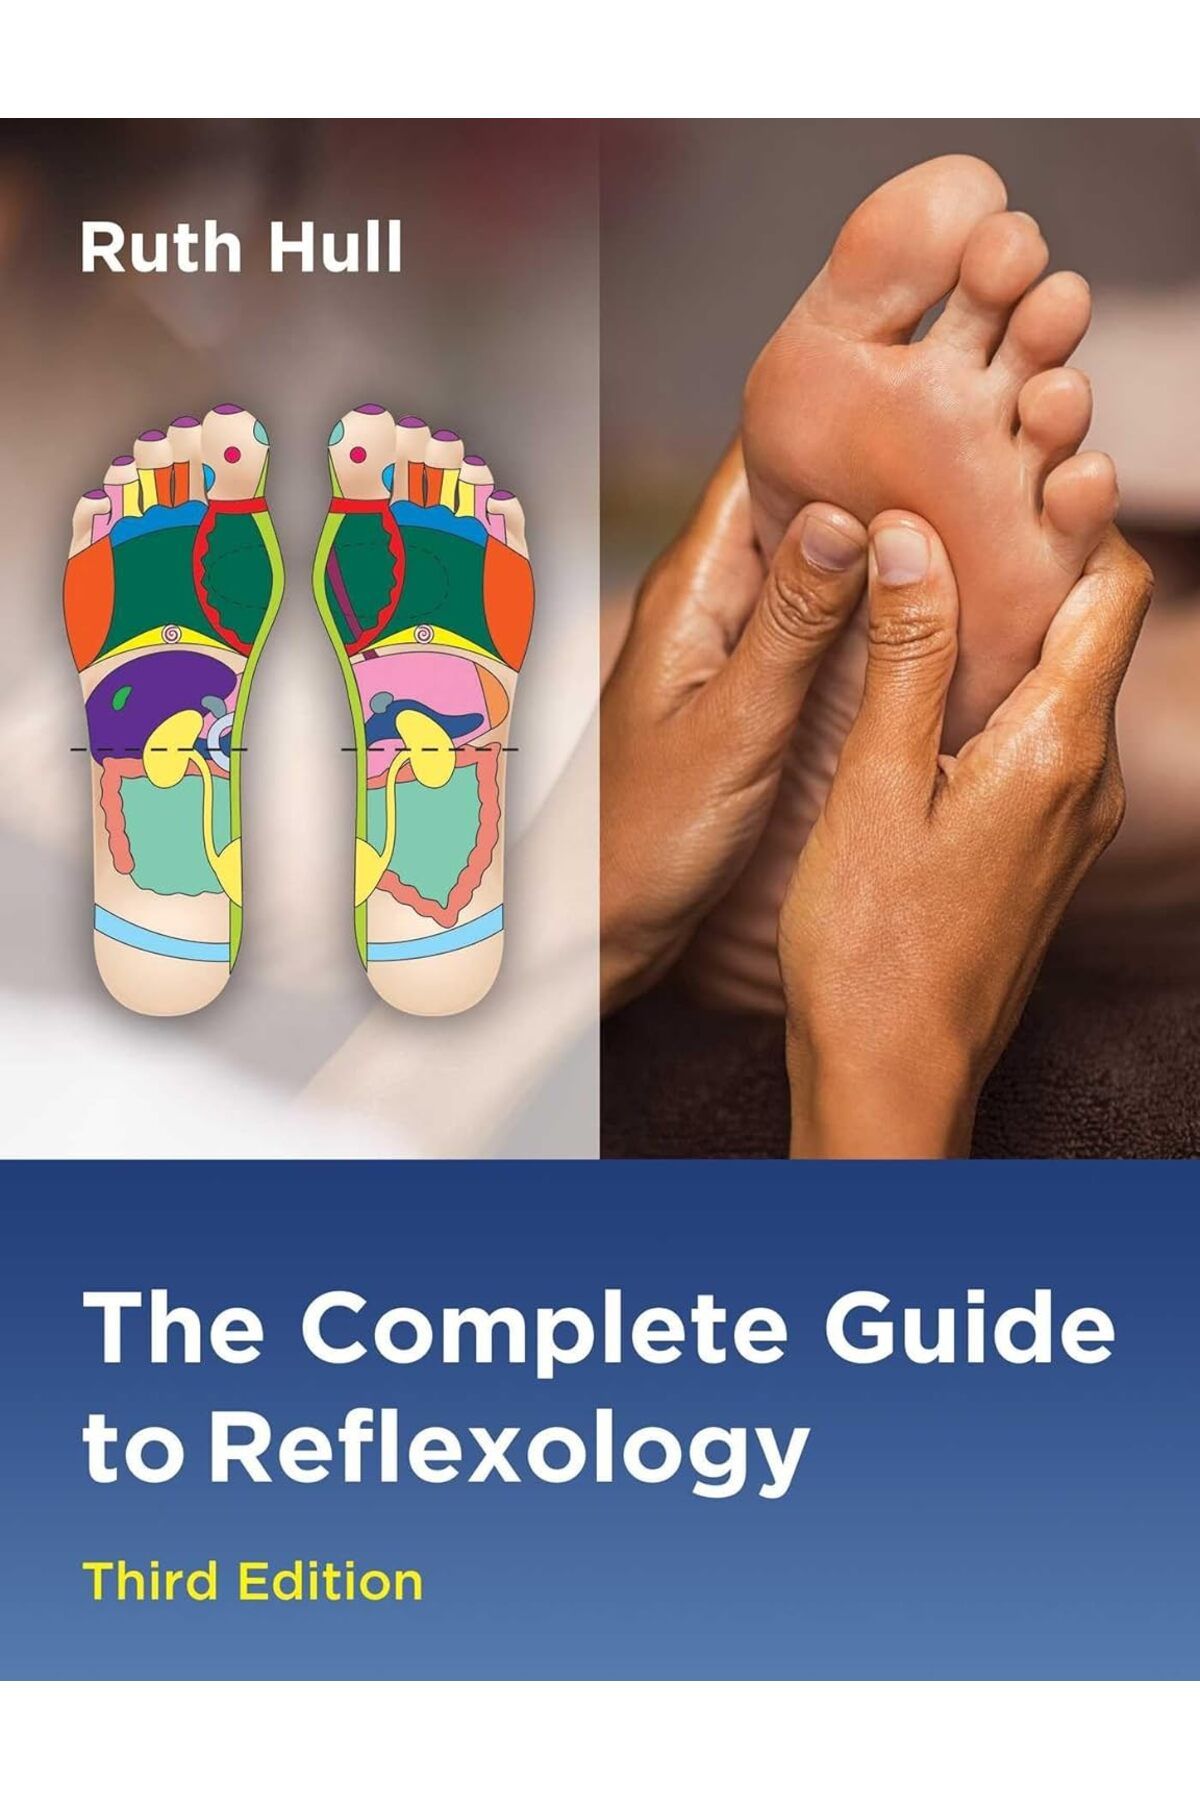 Wiley-Blackwell The Complete Guide to Reflexology / Ruth Hull